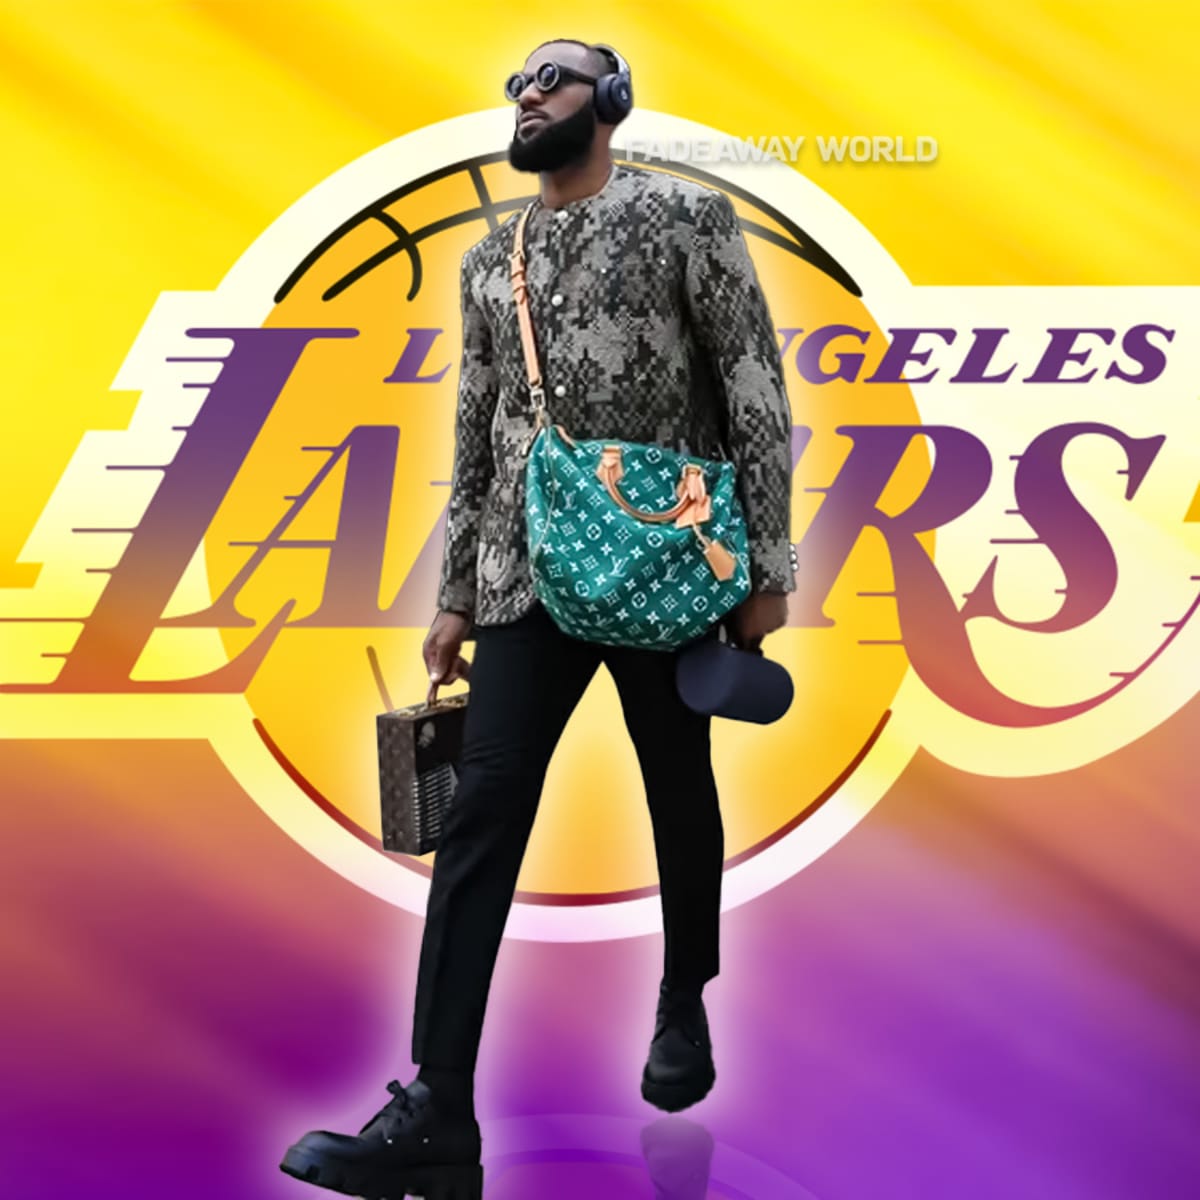 LeBron James Arrives At NBA Opener In $28K Pharrell-Designed Louis Vuitton  Outfit